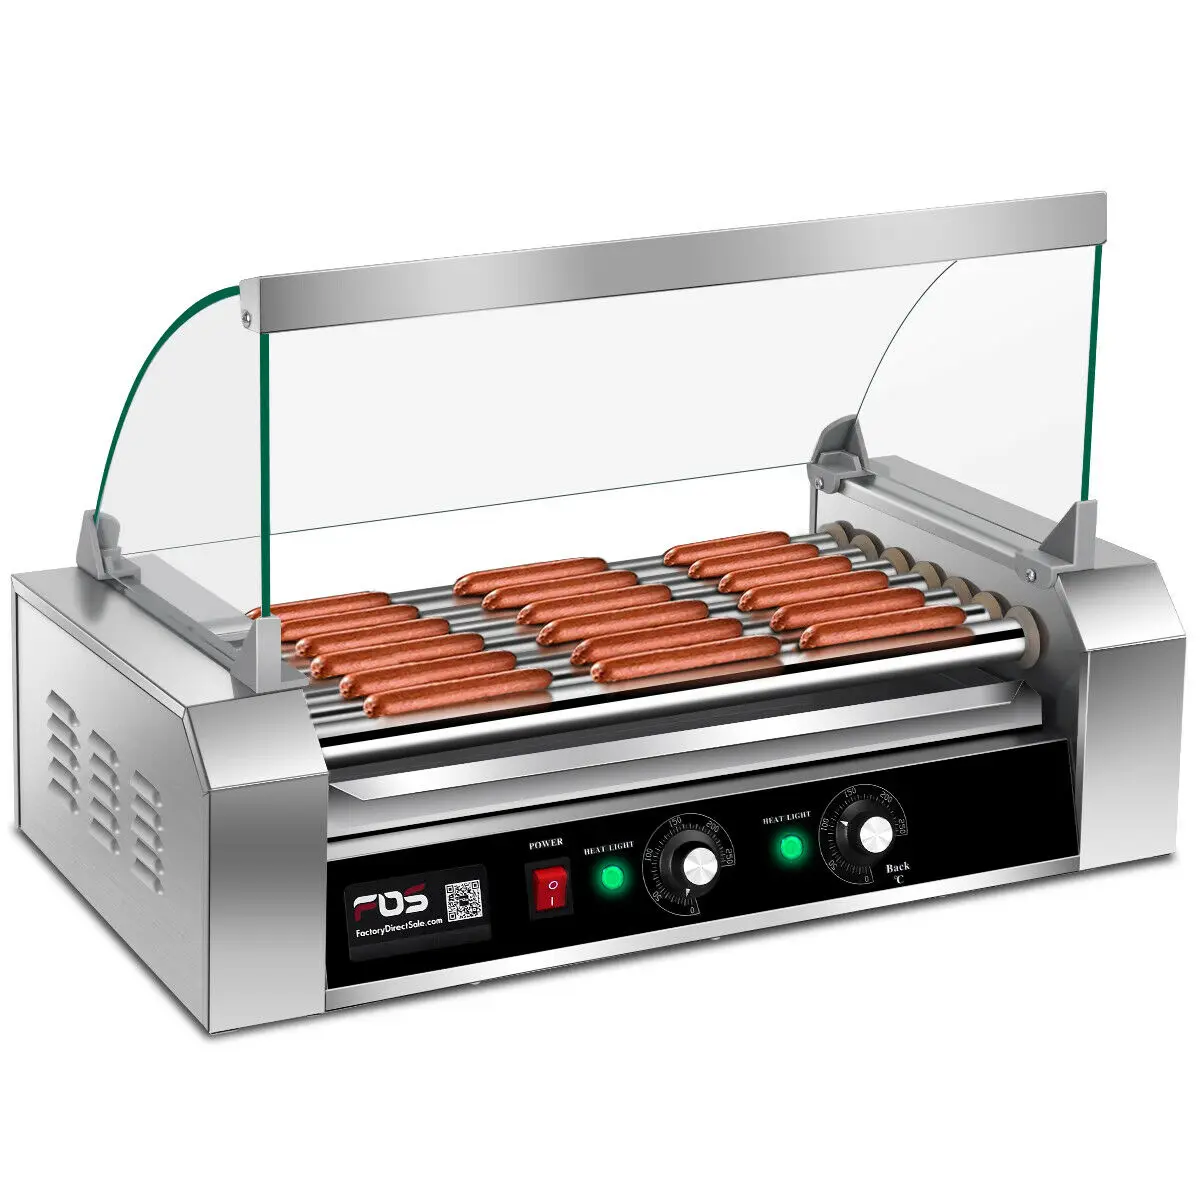 

Costway Commercial 18/30 Hot Dog Hotdog 7/11 Roller Grill Cooker Machine w/ Cover (7 Roller Grill)